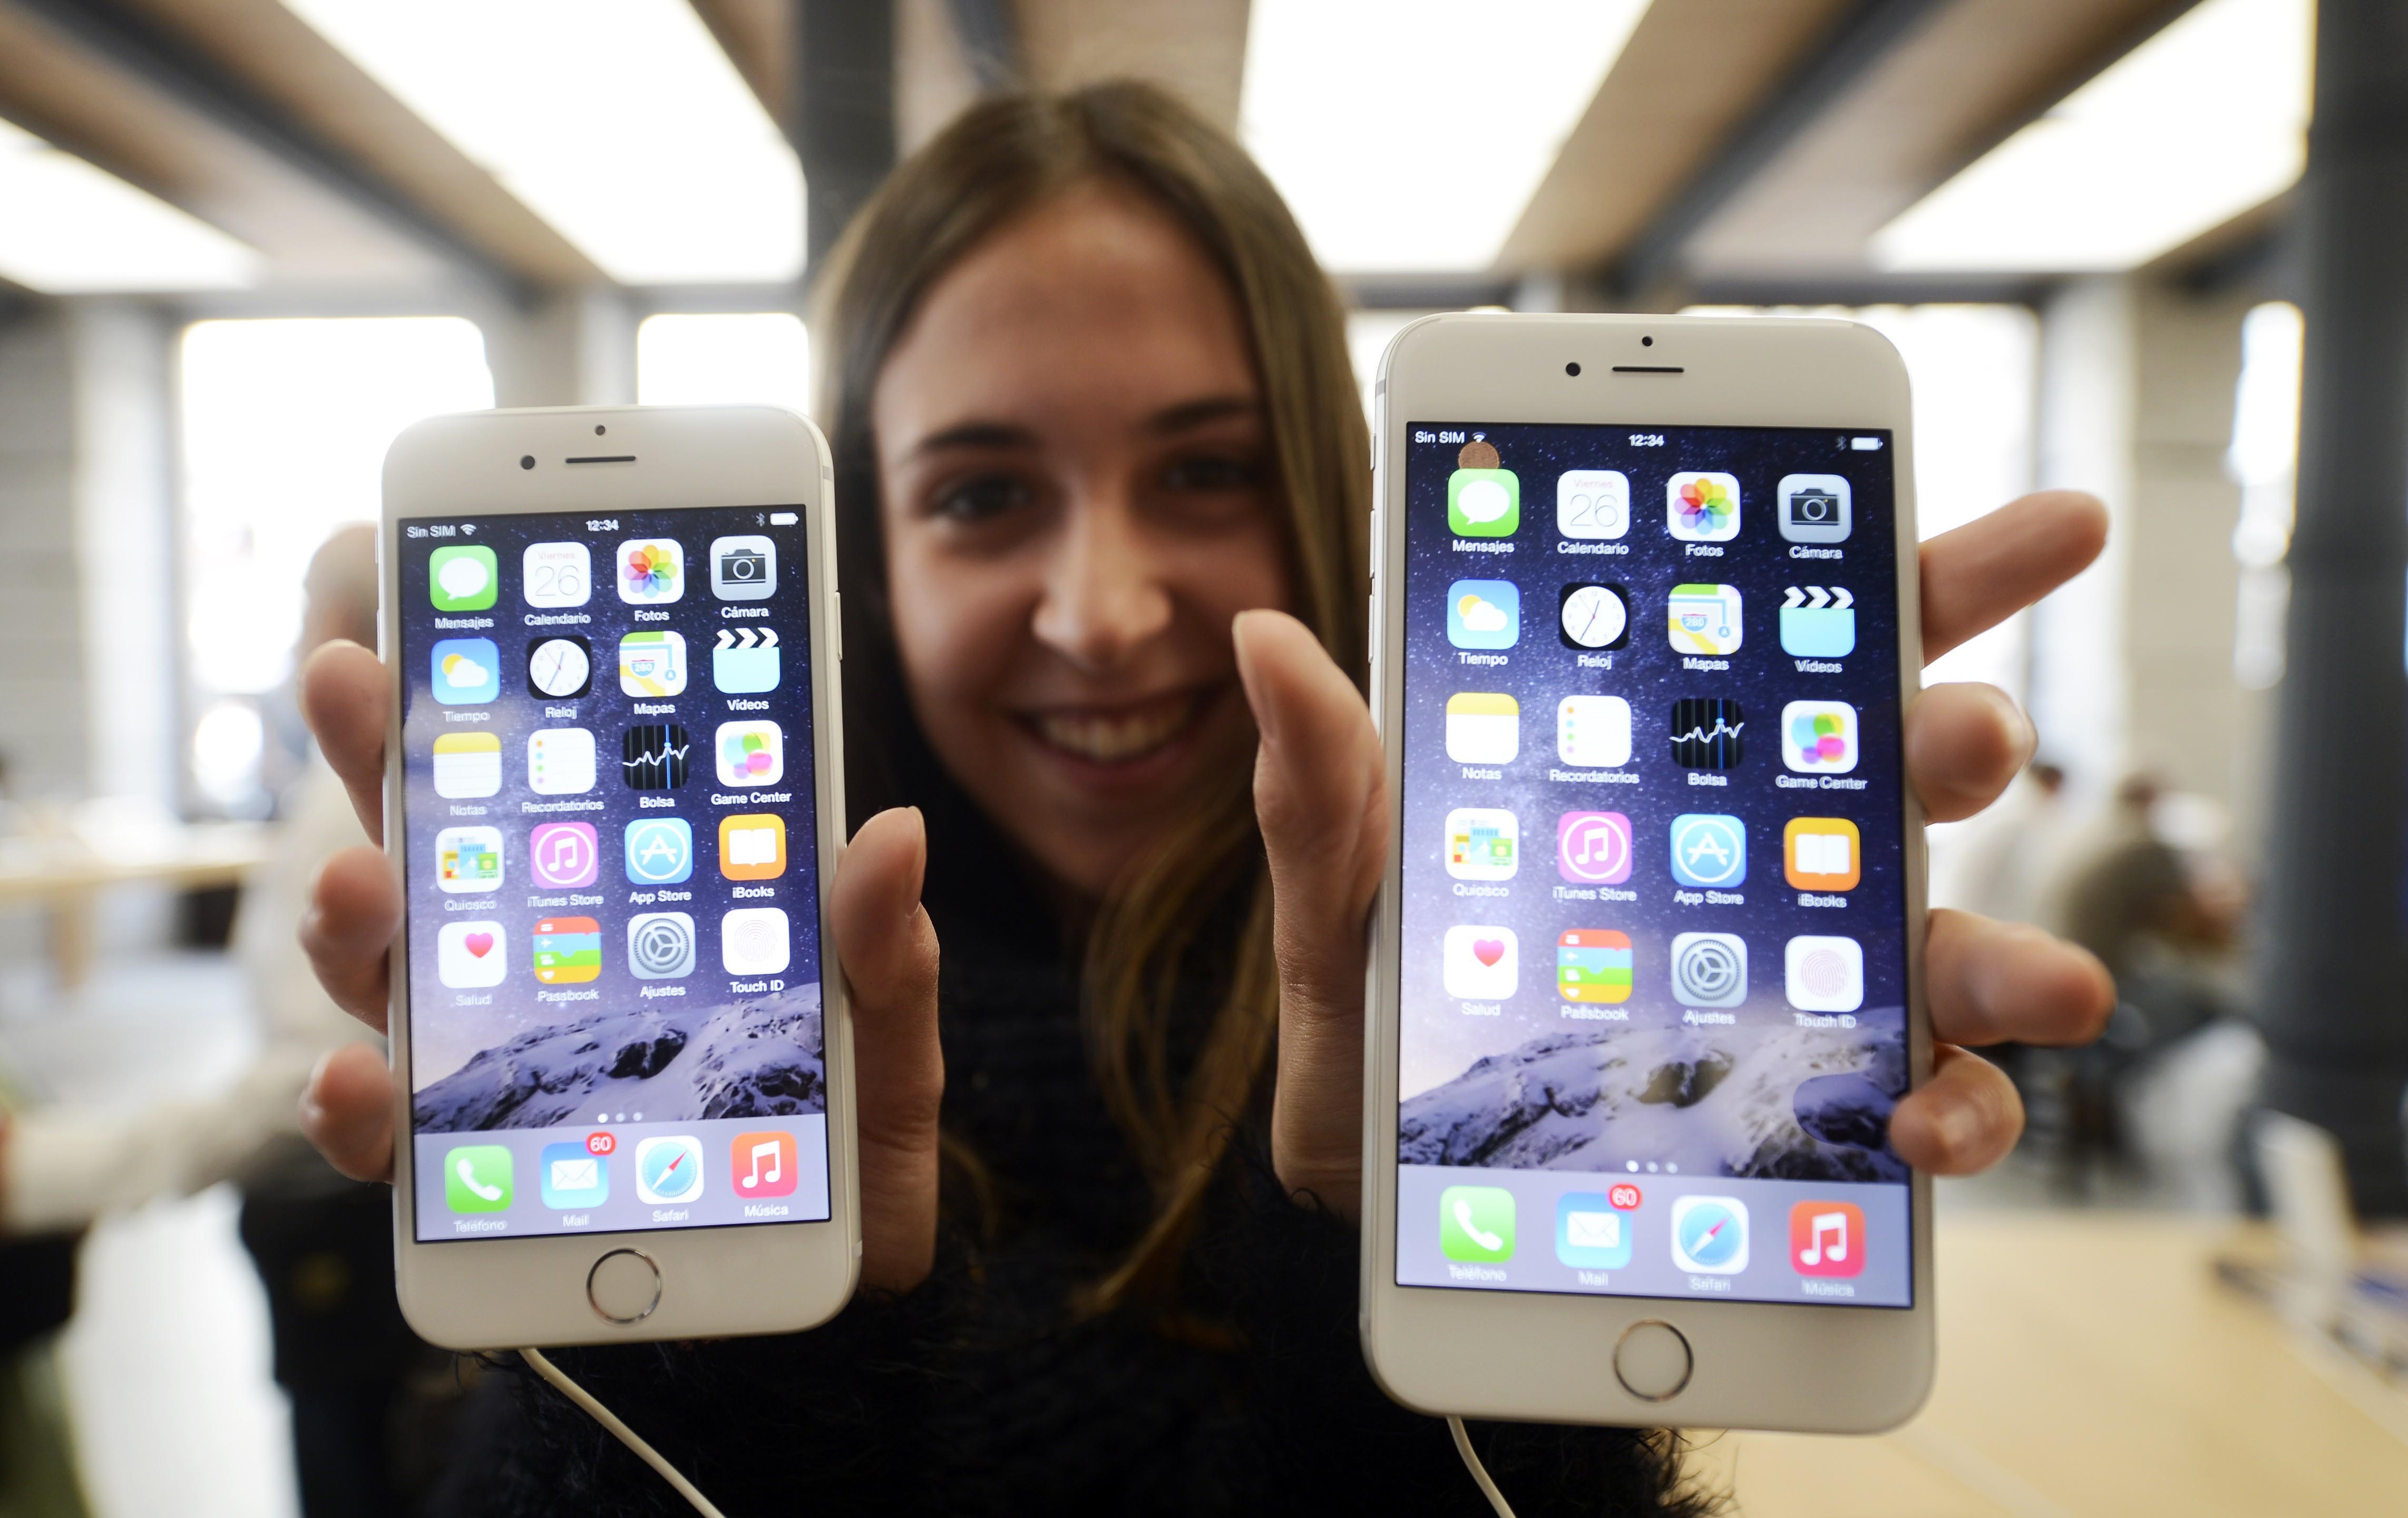 A customer shows the new products of Apple, iPhone 6 and iPhone 6 Plus, at an Apple Store in Madrid, Spain, on September 26, 2014. (Anadolu Agency&mdash;Getty Images)